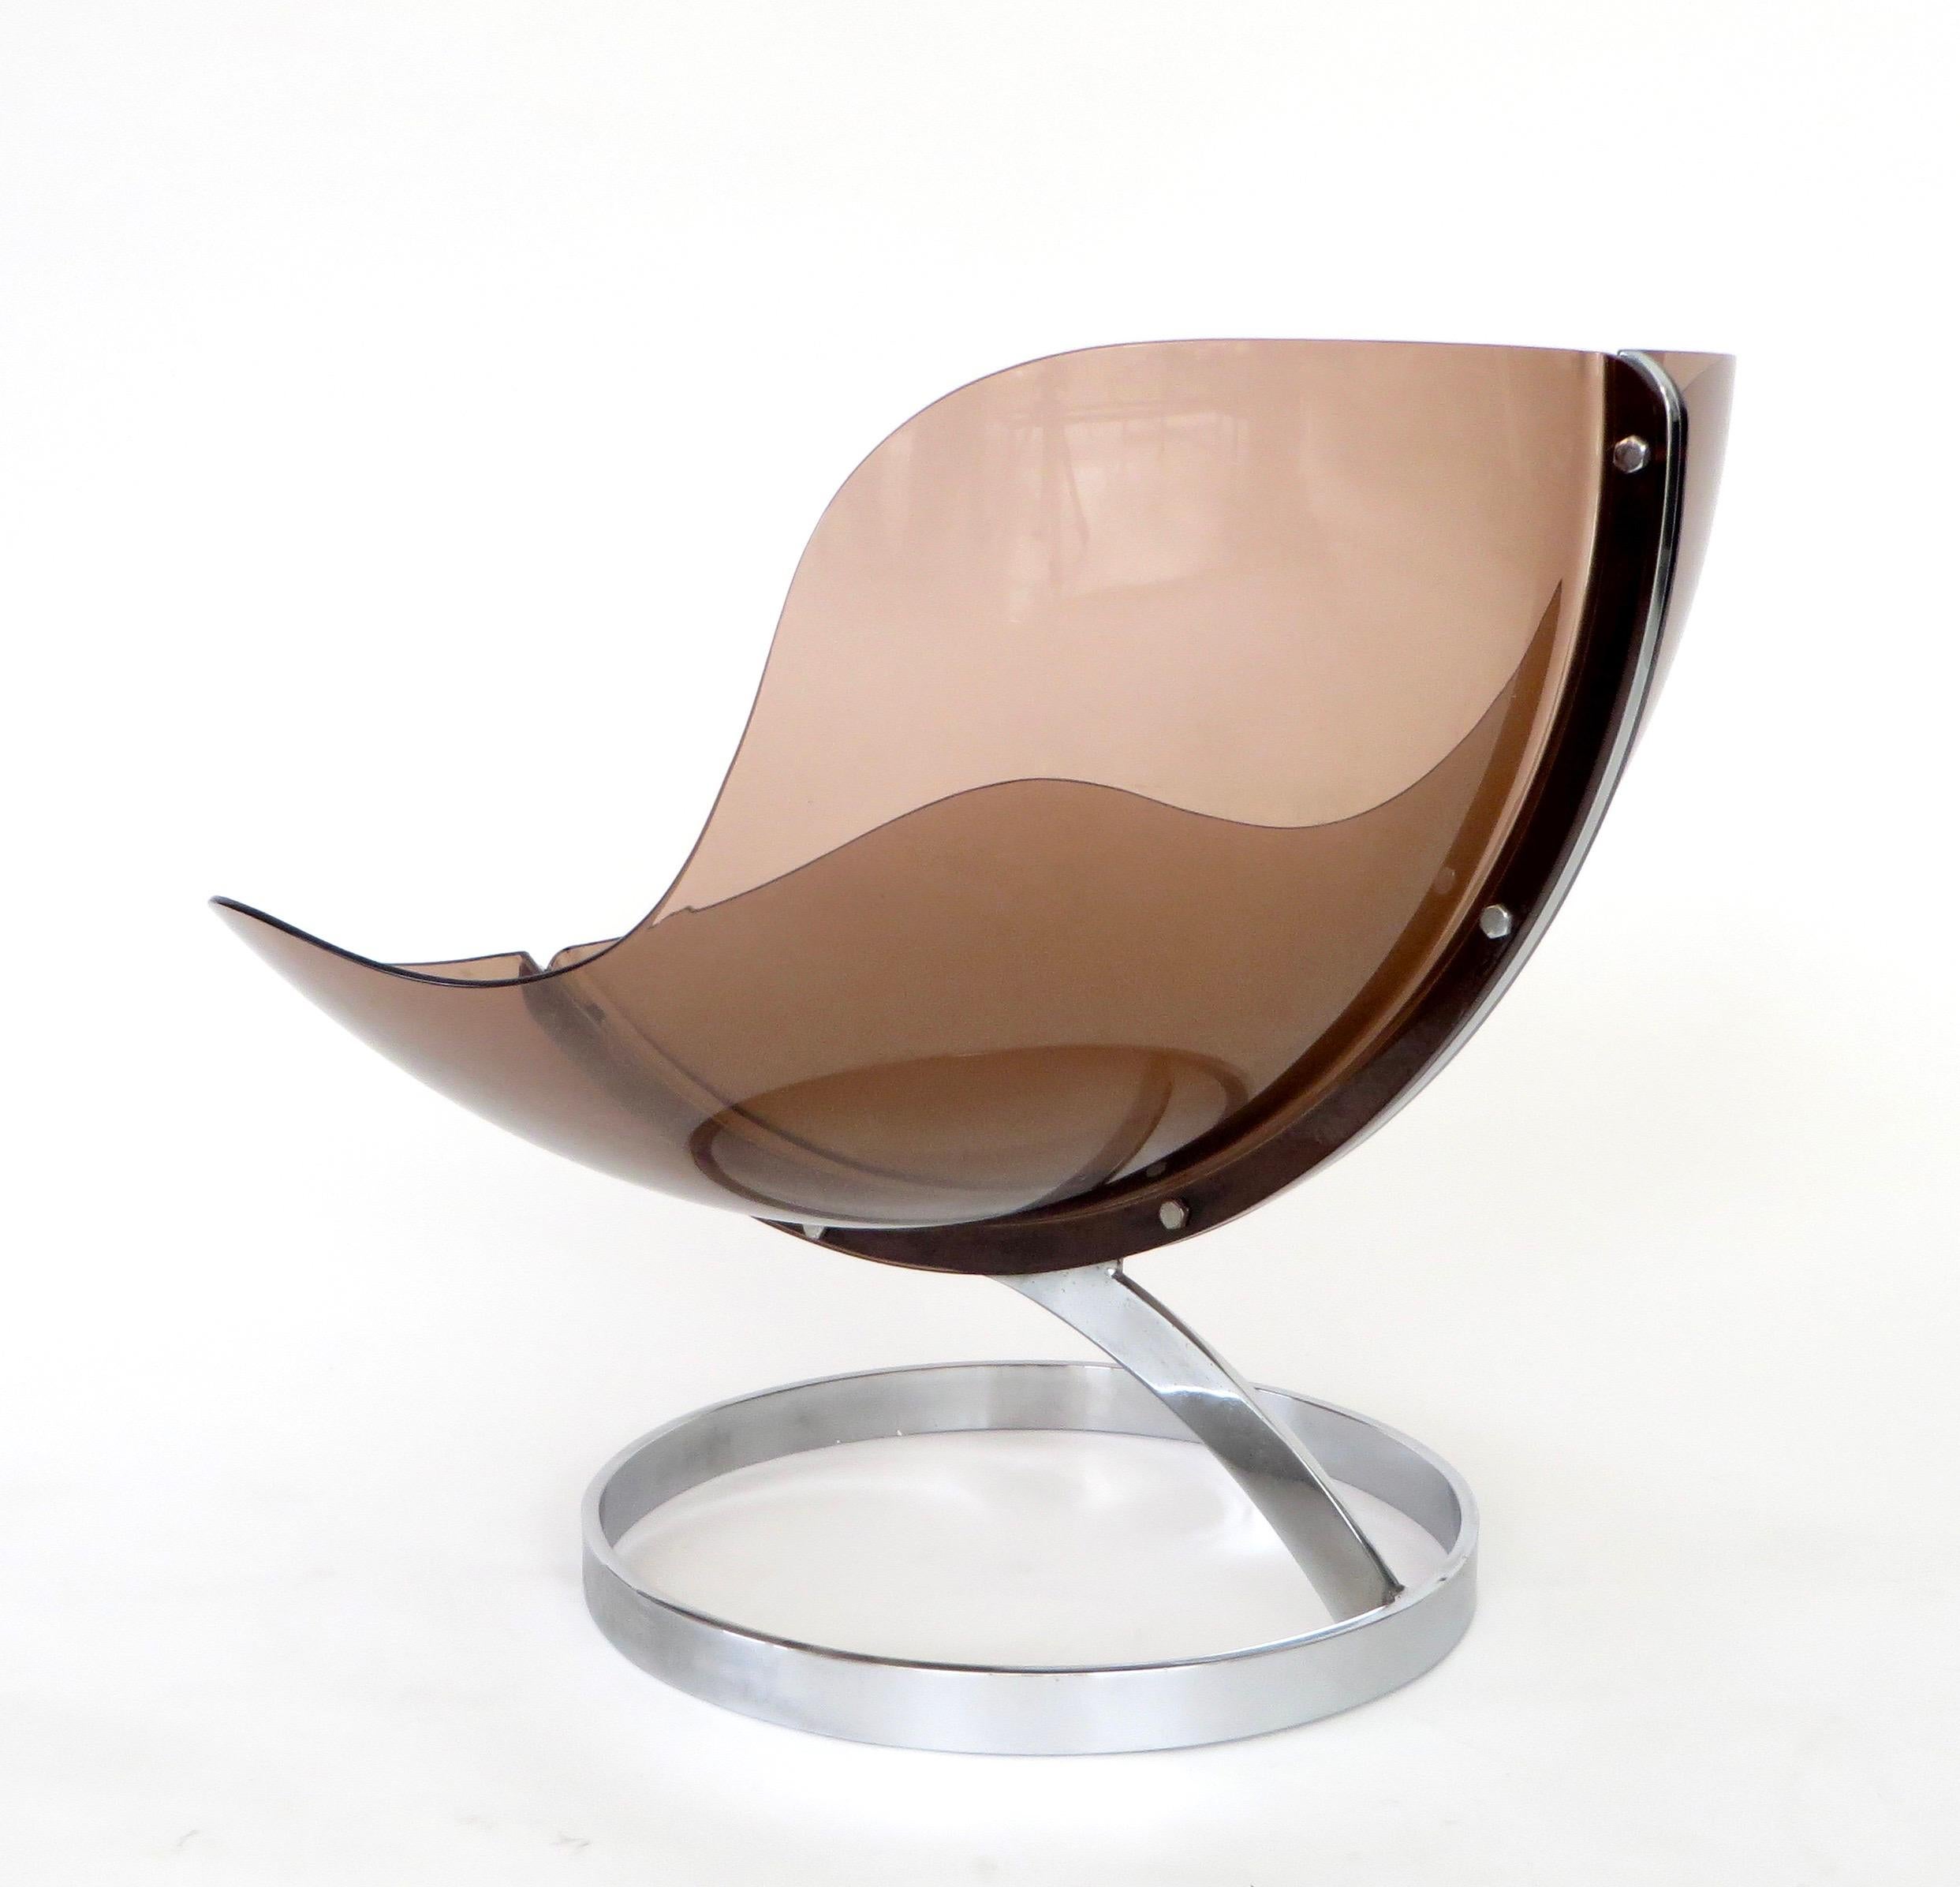 Boris Tabacoff French Sphere Chair Lucite Altuglas and Chrome c1971 For Sale 6